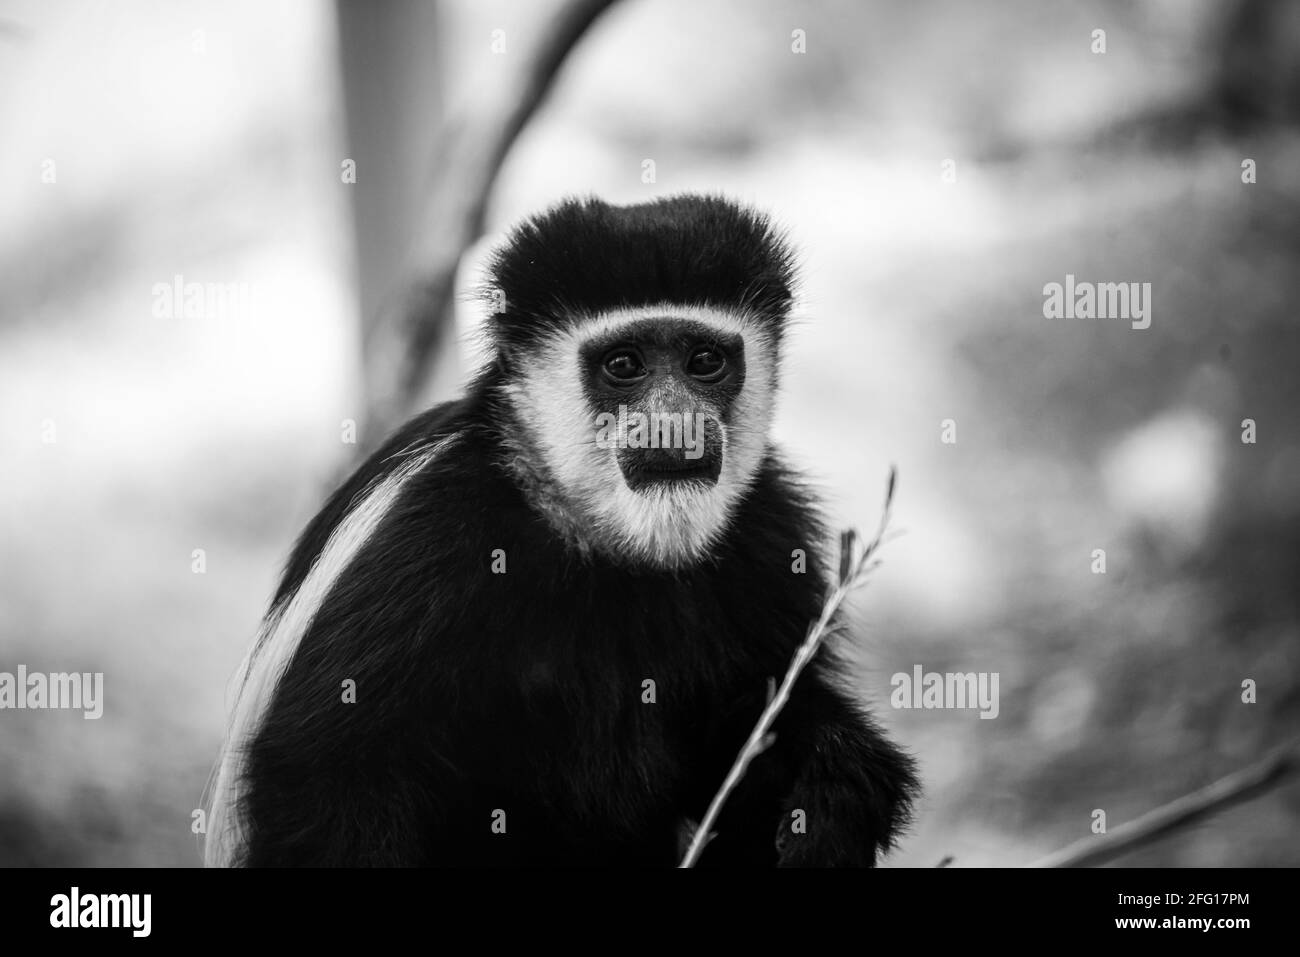 Black and White Monkey on Brown Tree Branch 0002 Stock Photo